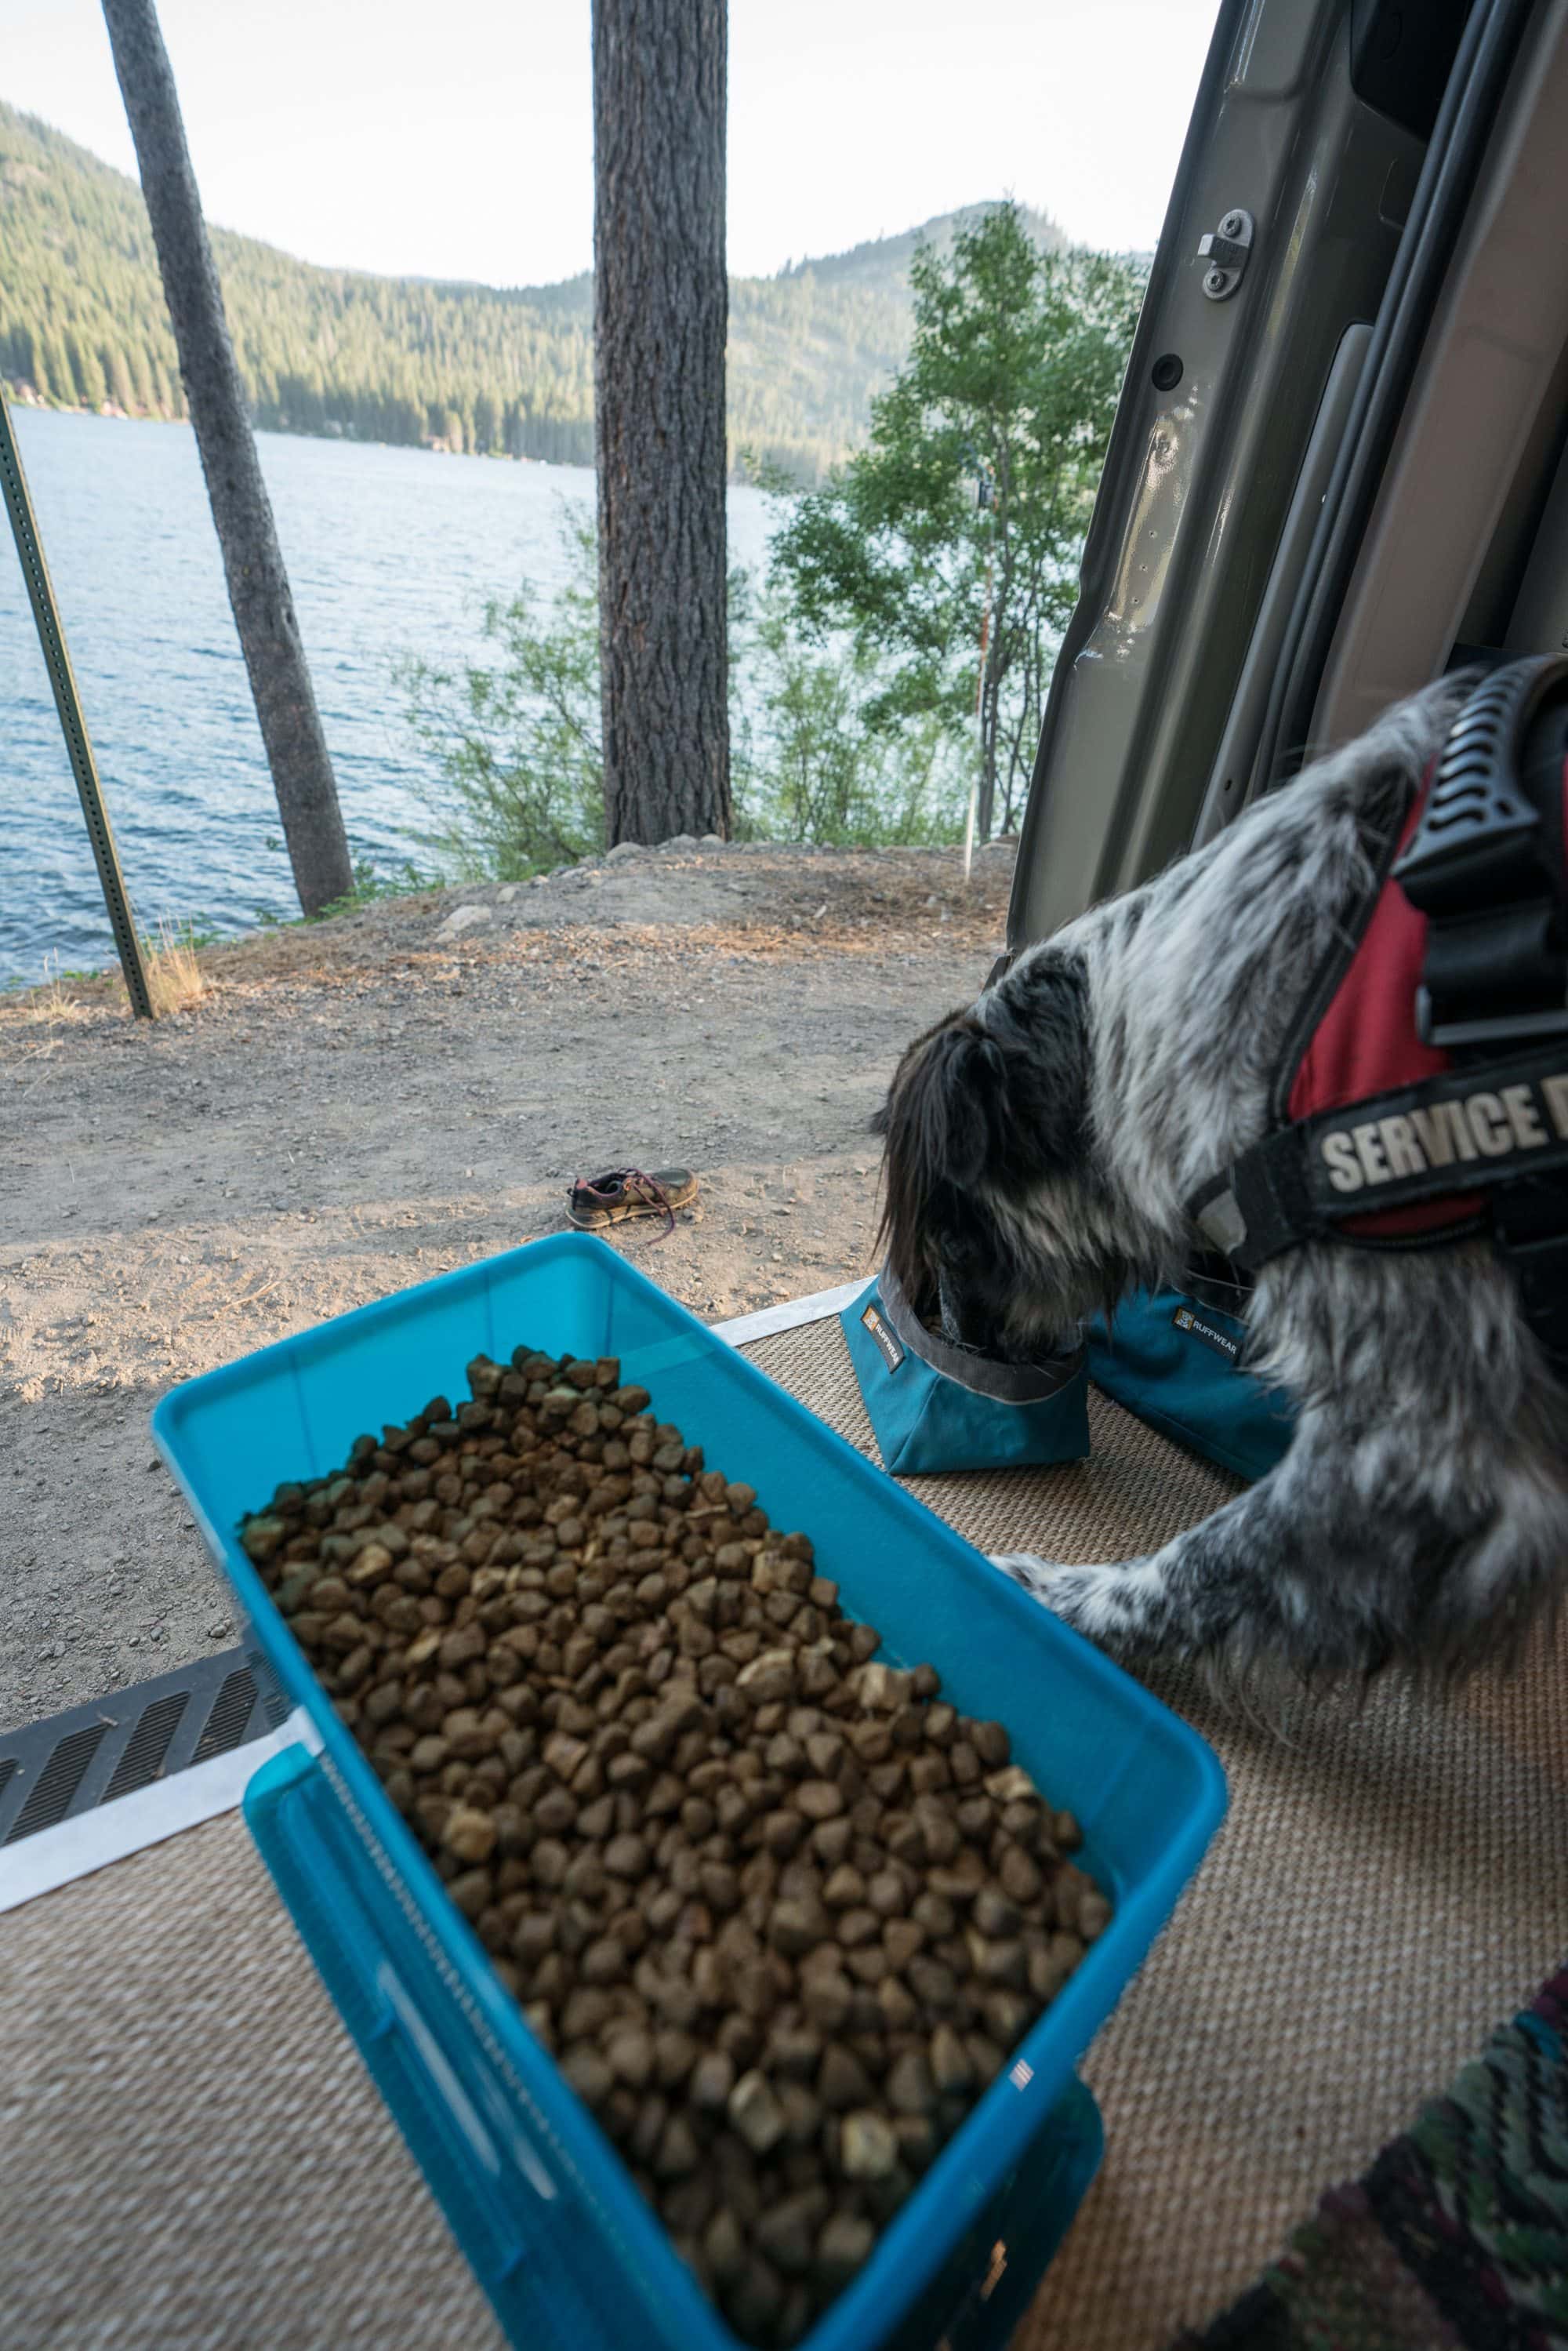 Wondering what van life with a dog is like? Here are tips for living in a van with pets and finding dog-friendly activities while traveling.